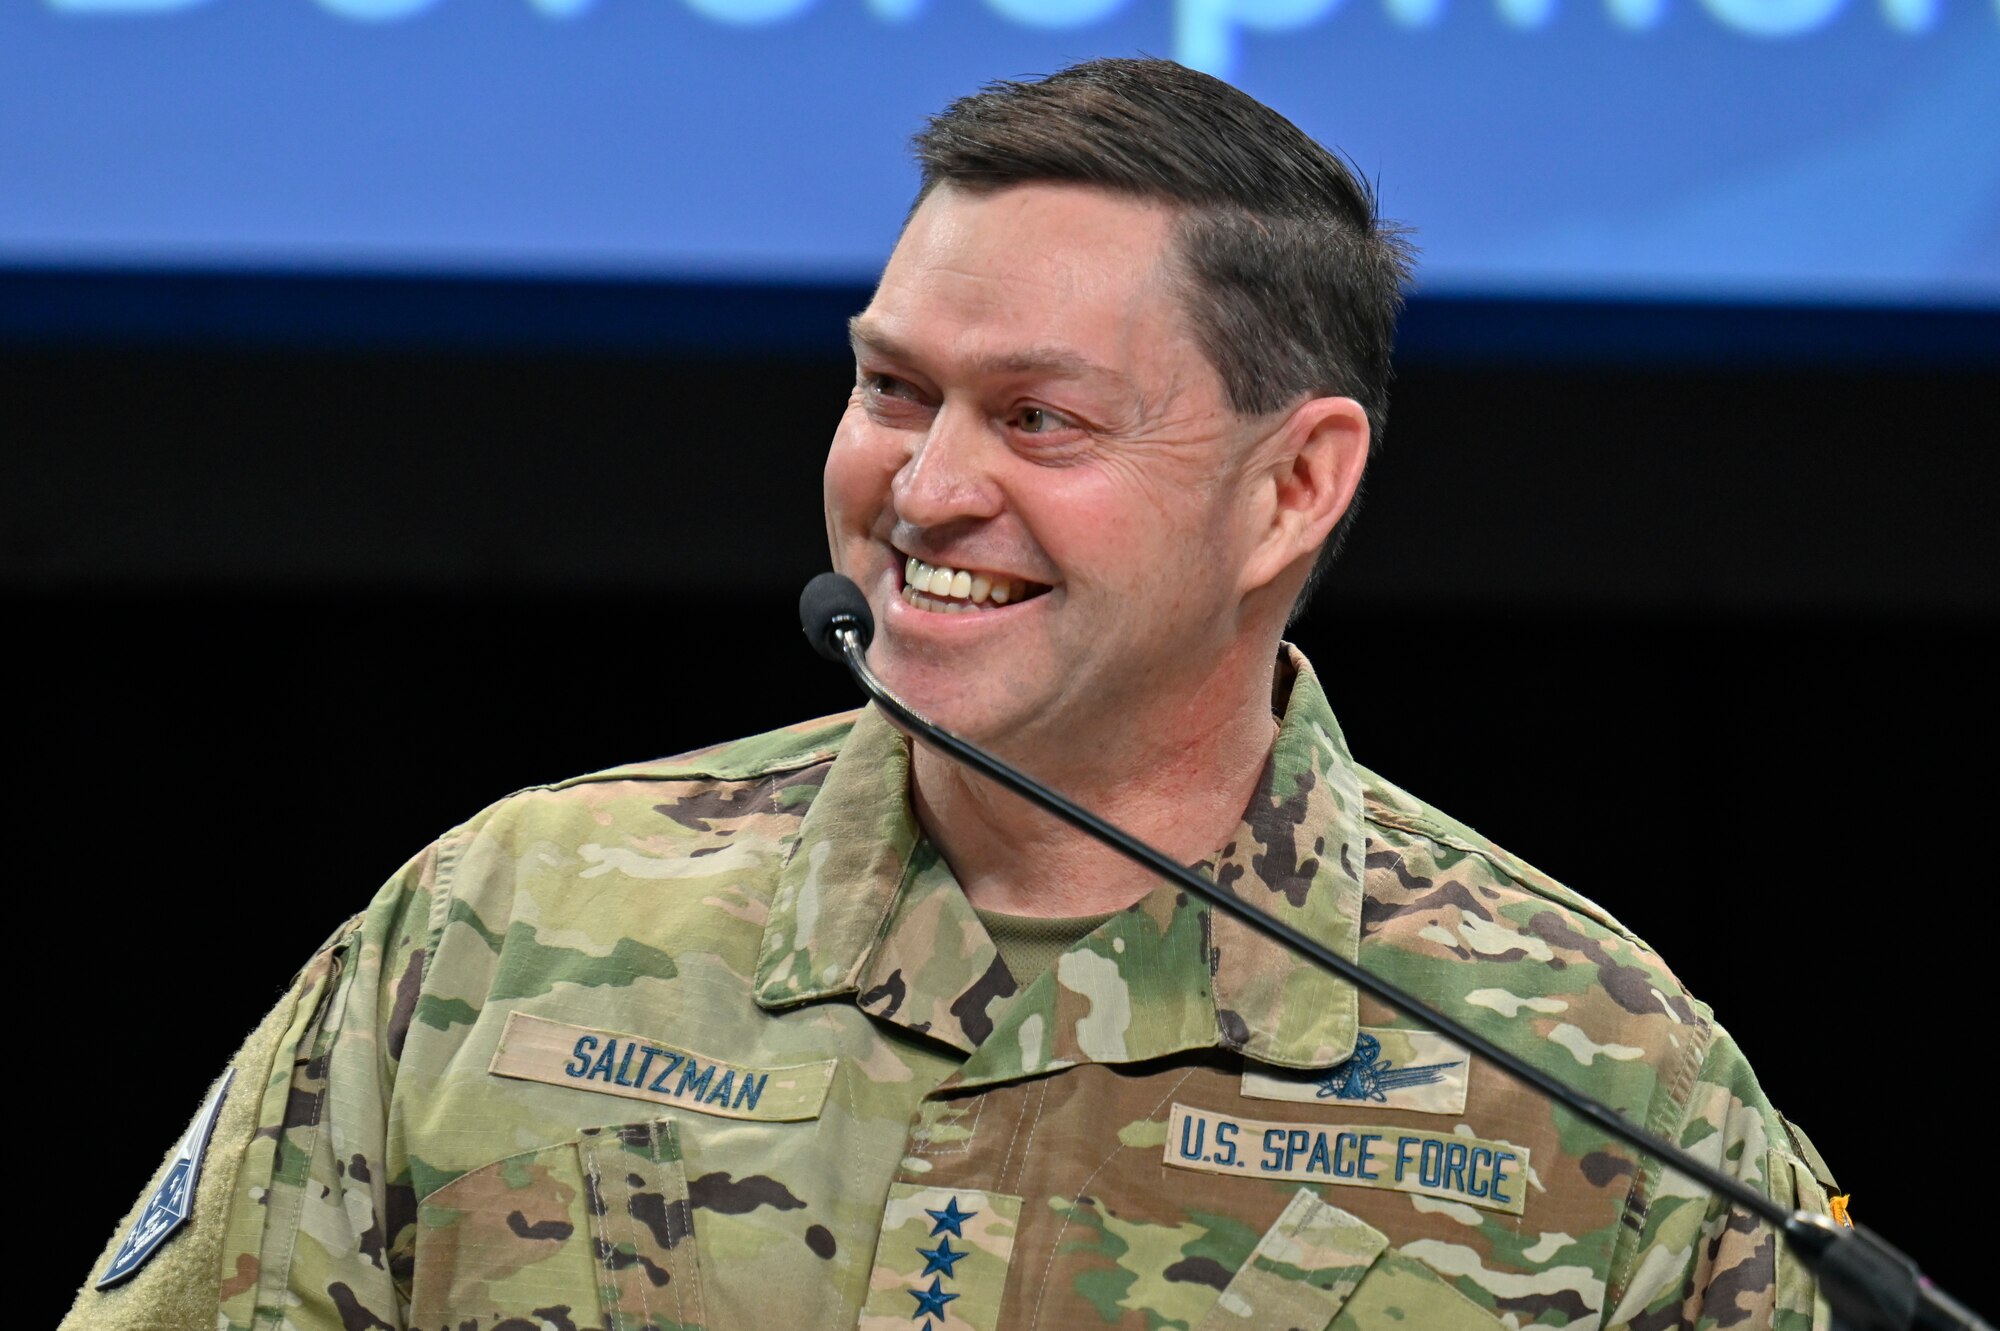 Chief of Space Operations Gen. Chance Saltzman delivers a keynote speech “Guardians in the Fight” during the Air and Space Forces Association 2023 Warfare Symposium in Aurora, Colo., March 7, 2023. (U.S. Air Force photo by Eric Dietrich)